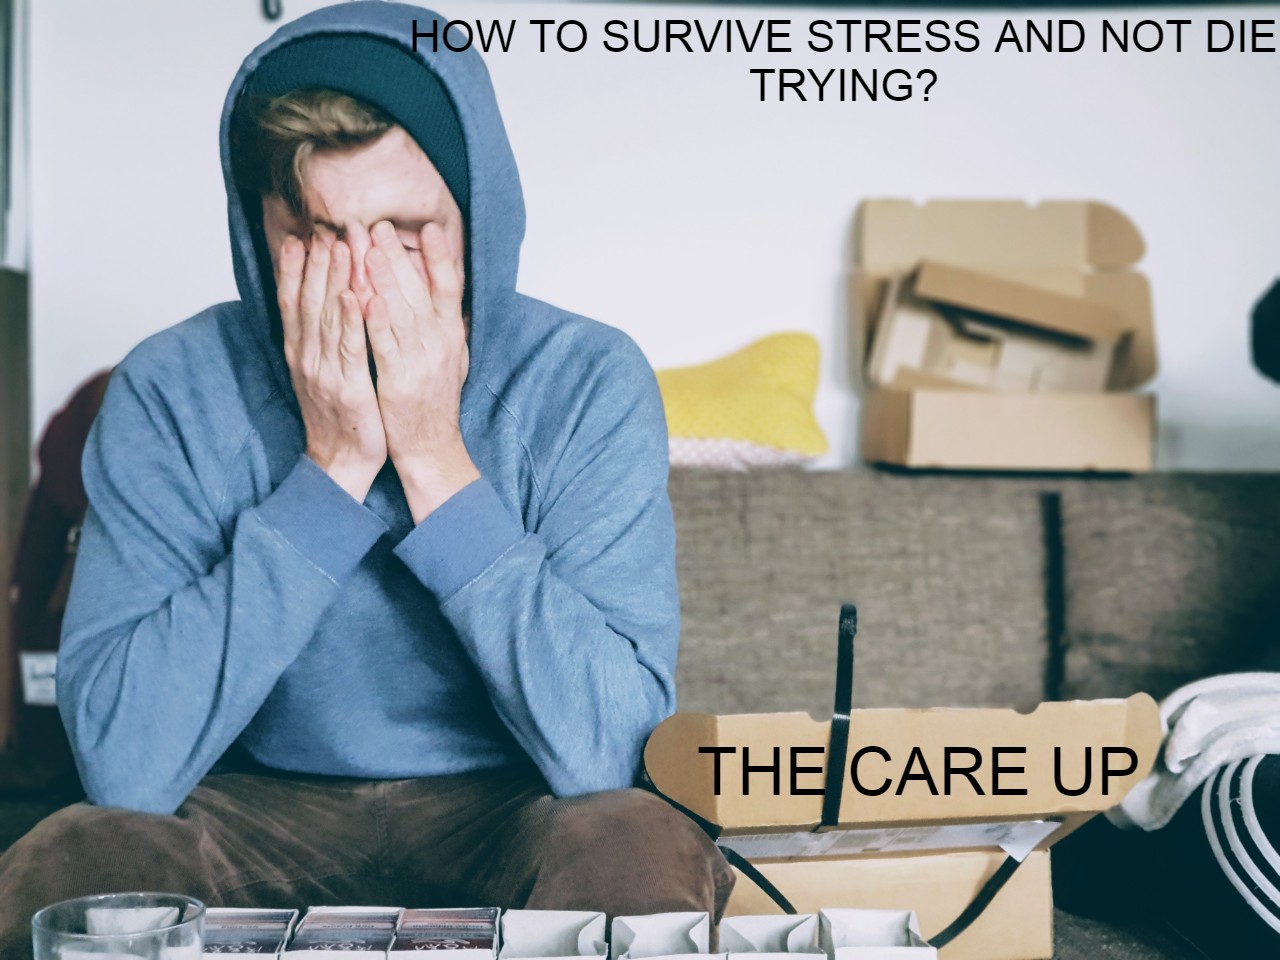 HOW TO SURVIVE STRESS AND NOT DIE TRYING?